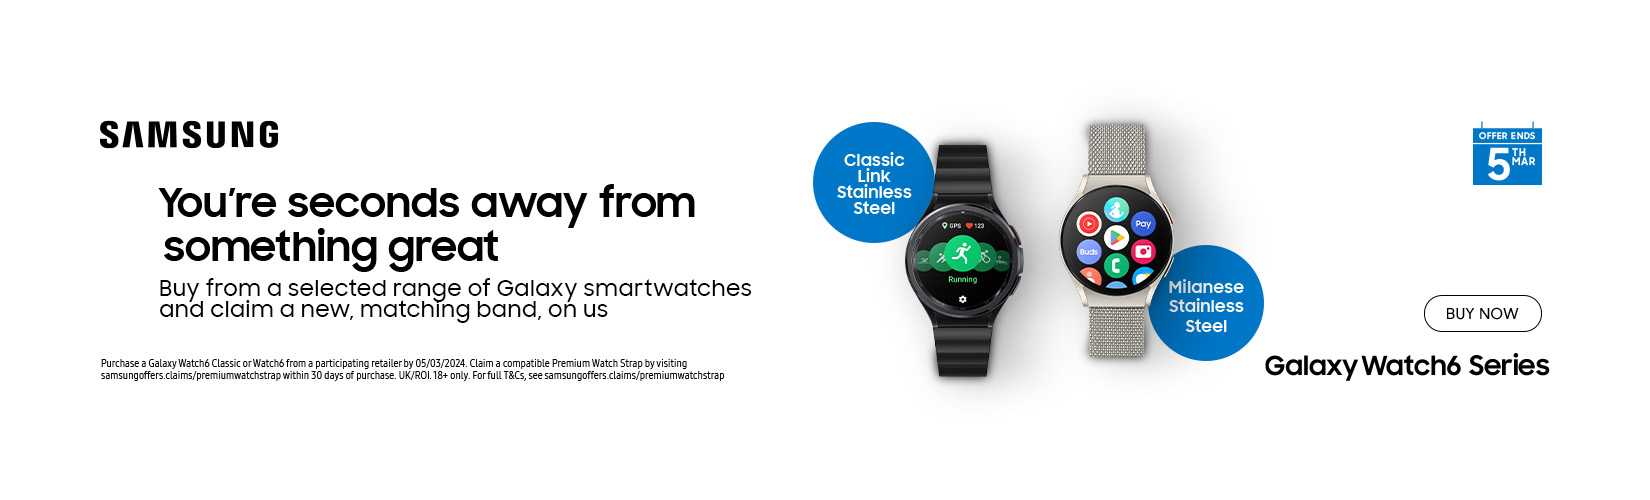 Samsung. Galaxy Watch6 Series. You're seconds away from something great.